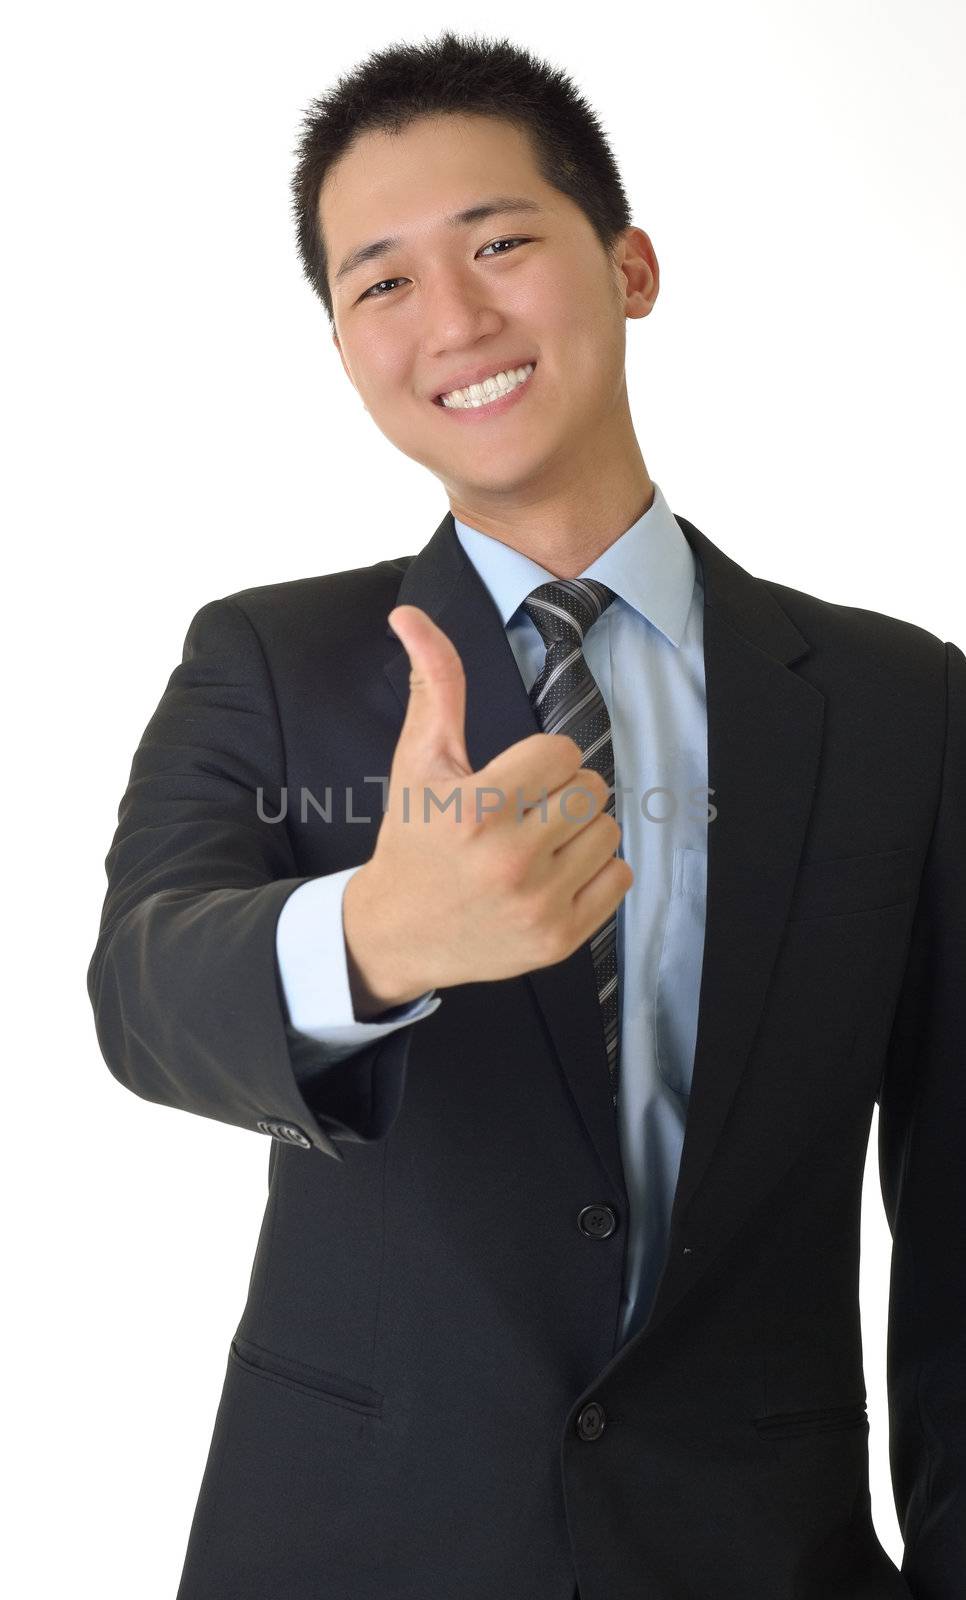 Smiling young business man of Asian giving you a thumbs up sign isolated against white.